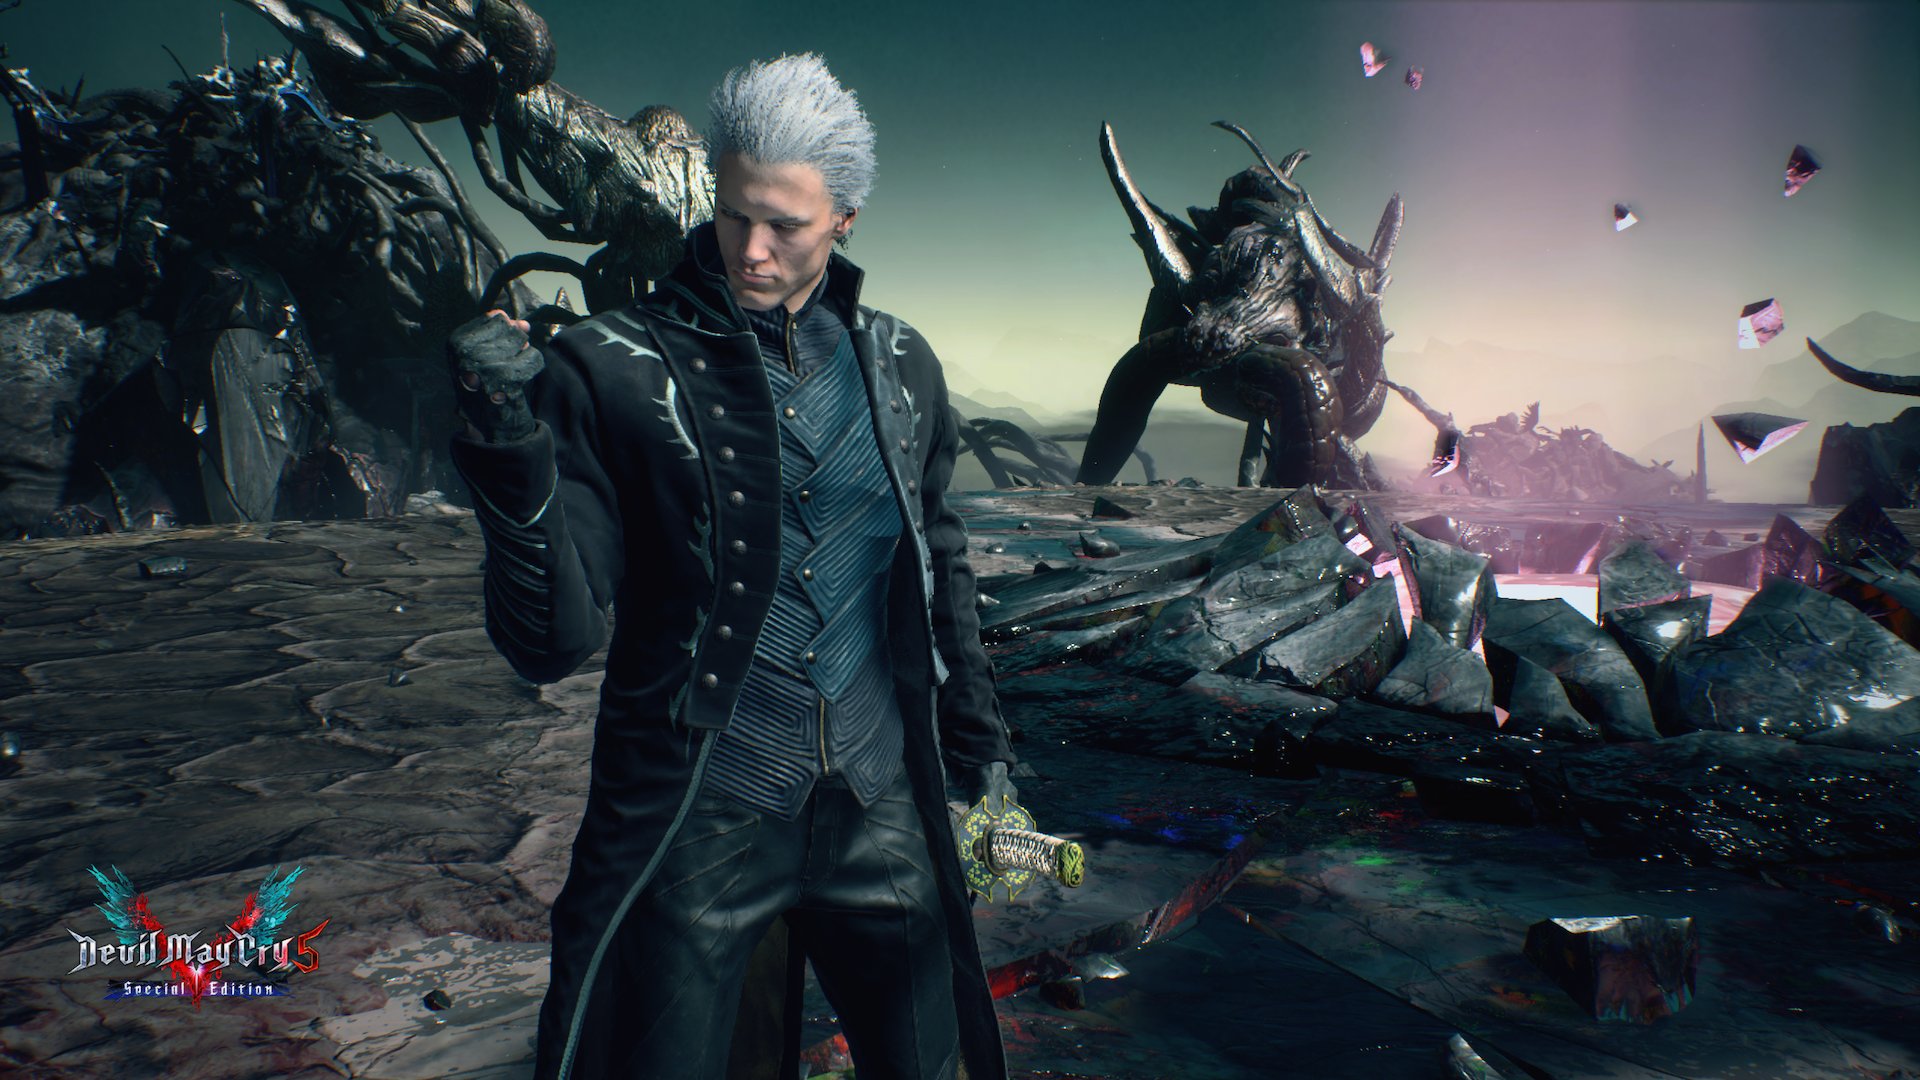 𝐅𝐮𝐫𝐚𝐧 on X: Inspired by the coatless Vergil appreciation